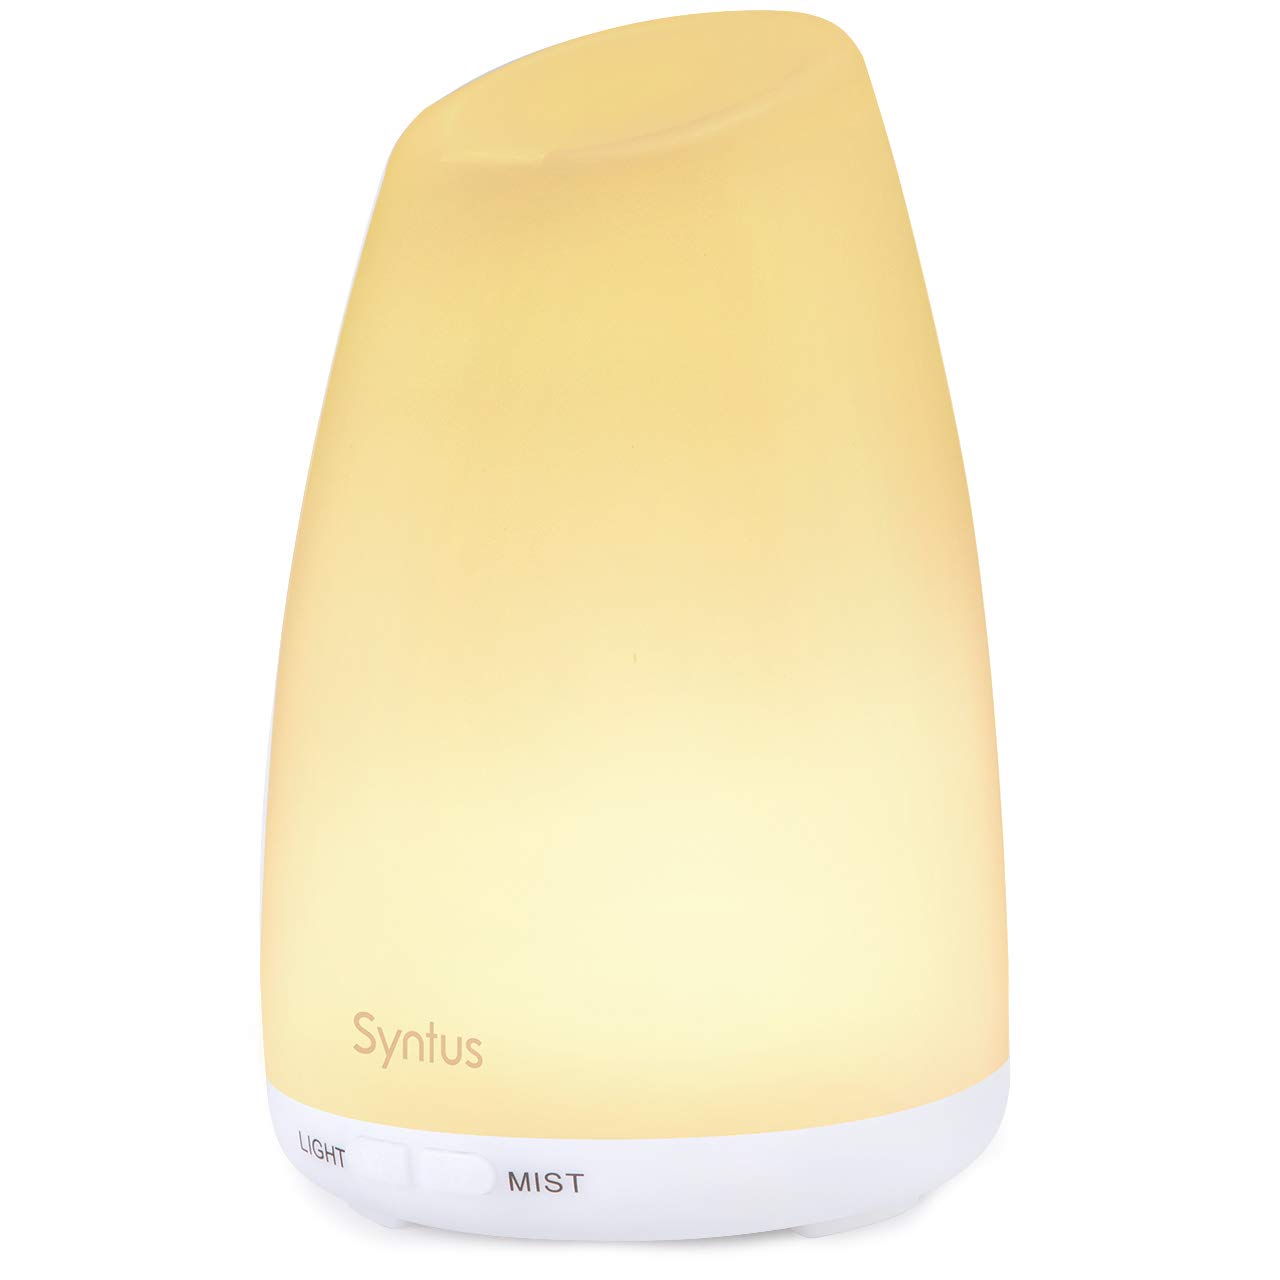 Syntus 150ML Essential Oil Diffuser Ultrasonic Aromatherapy Diffusers with Adjustable Mist Mode and Waterless Auto Shut-Off for Home Office